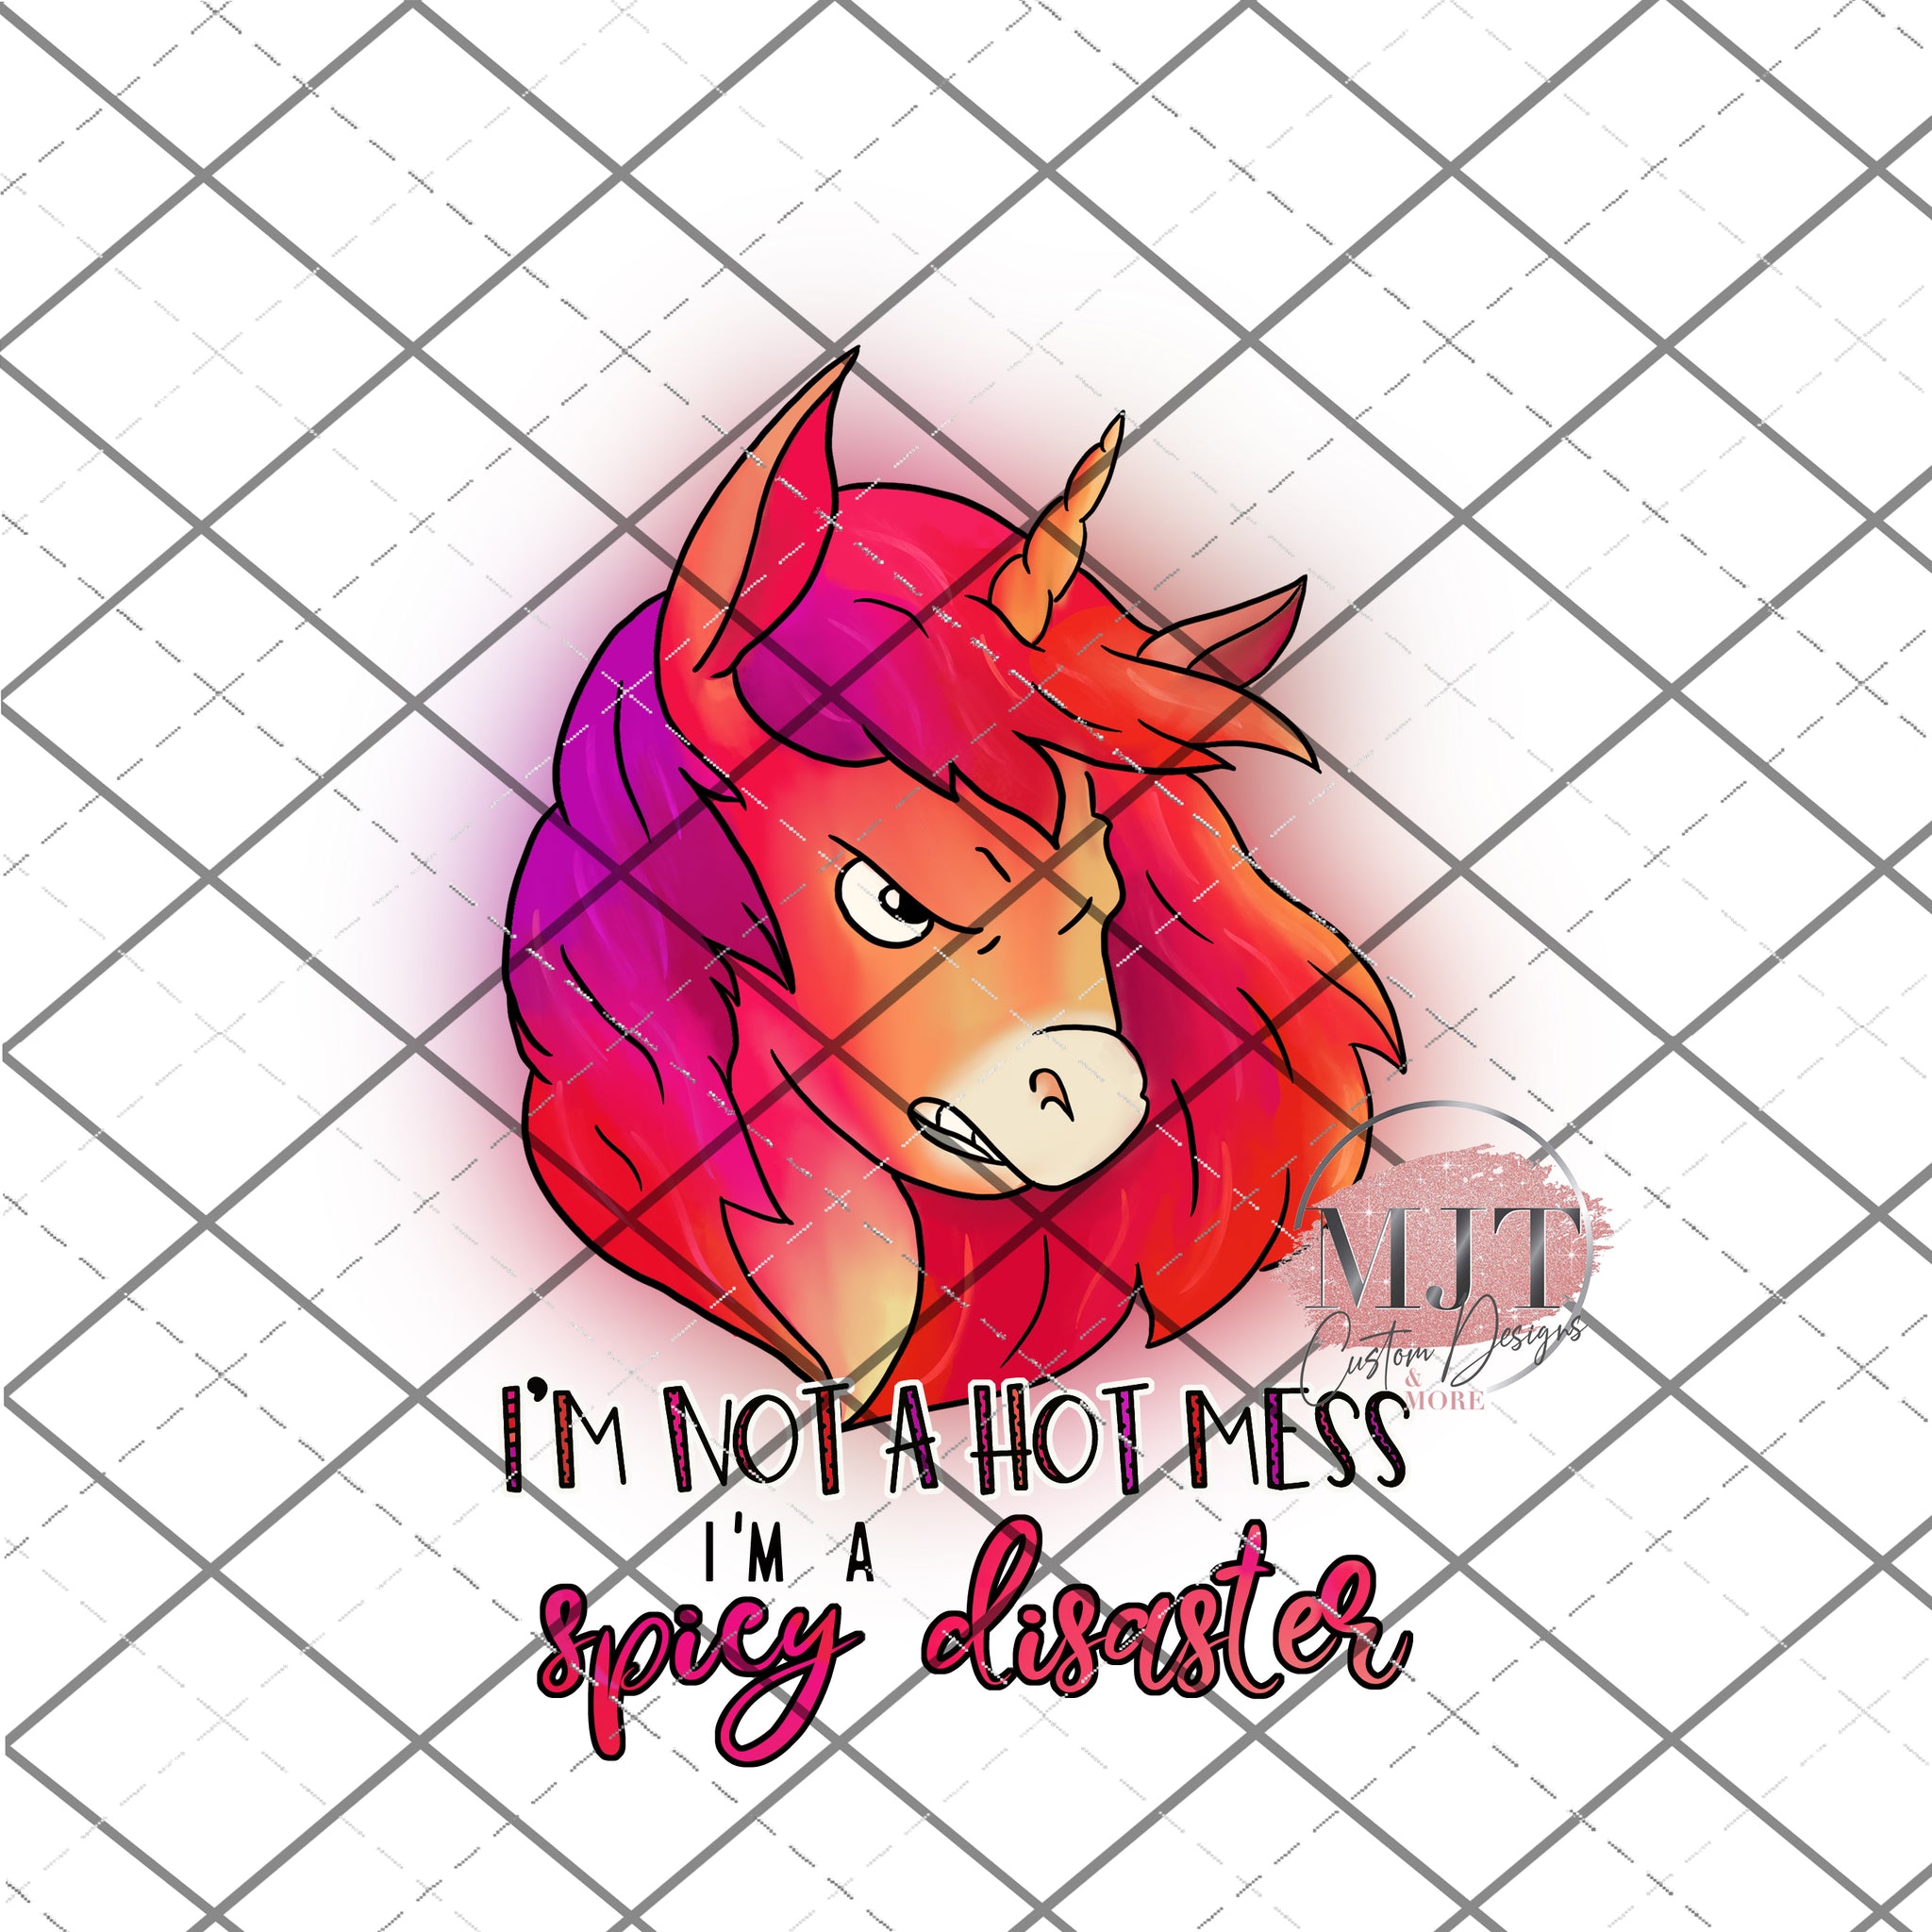 I'm not a hot mess - I'm a spicy disaster PNG File